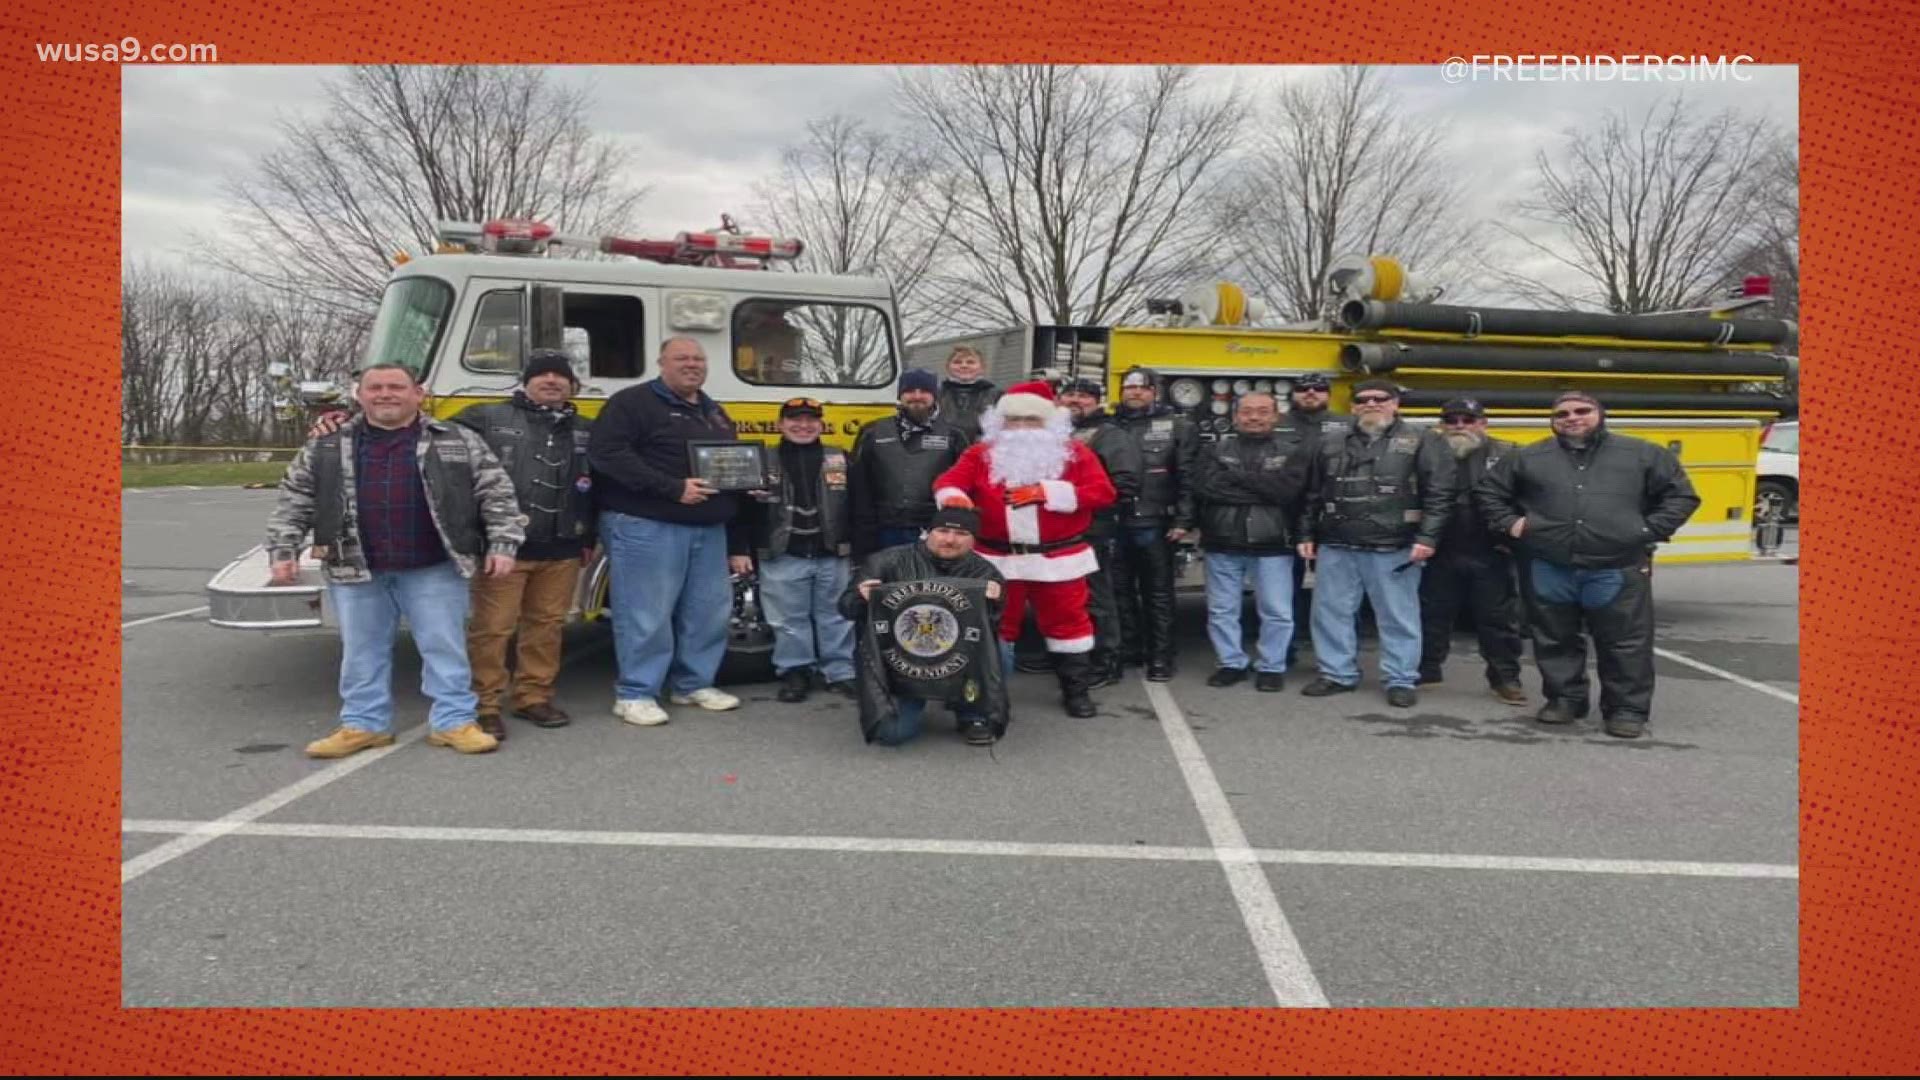 The club brought Santa down from the North Pole to help one family's Christmas wish come true.